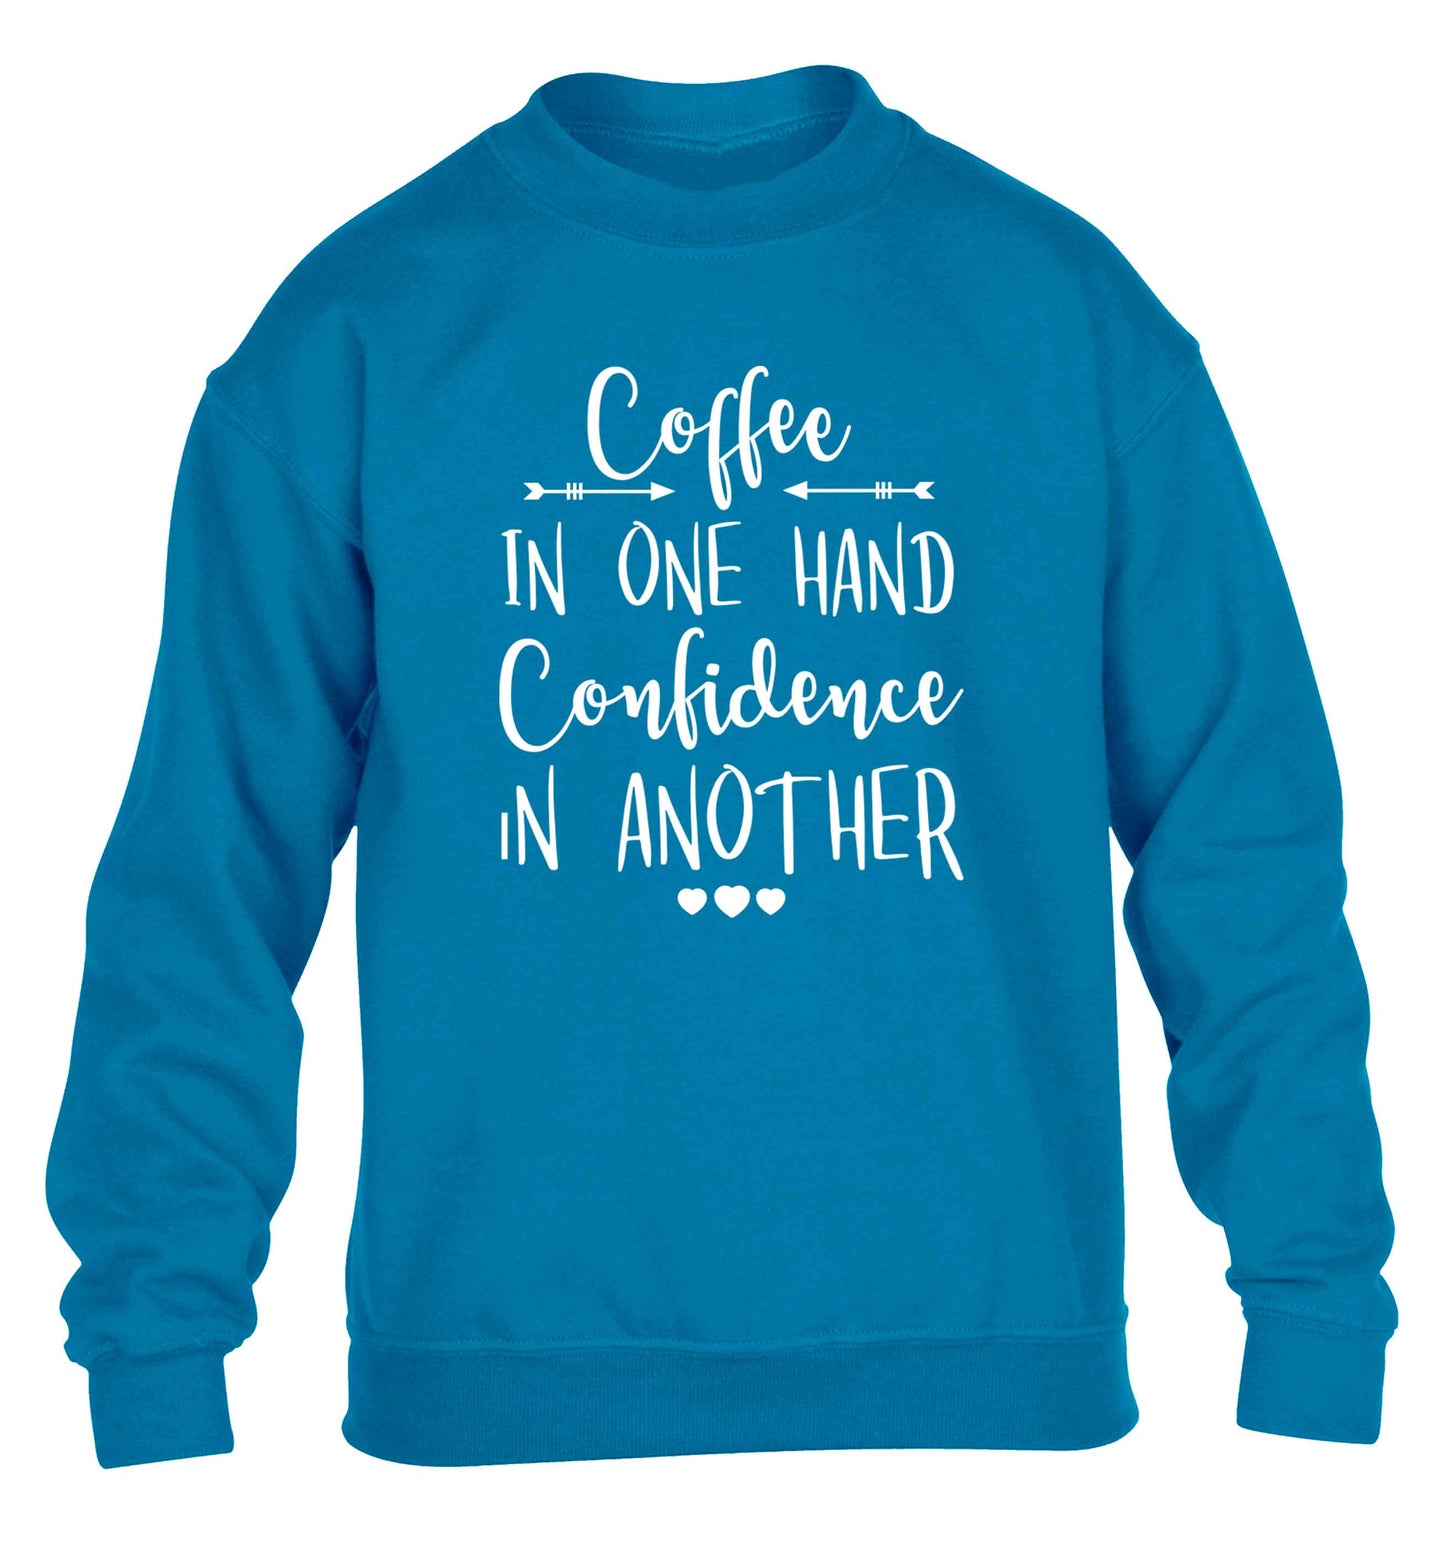 Coffee in one hand confidence in the other children's blue sweater 12-13 Years